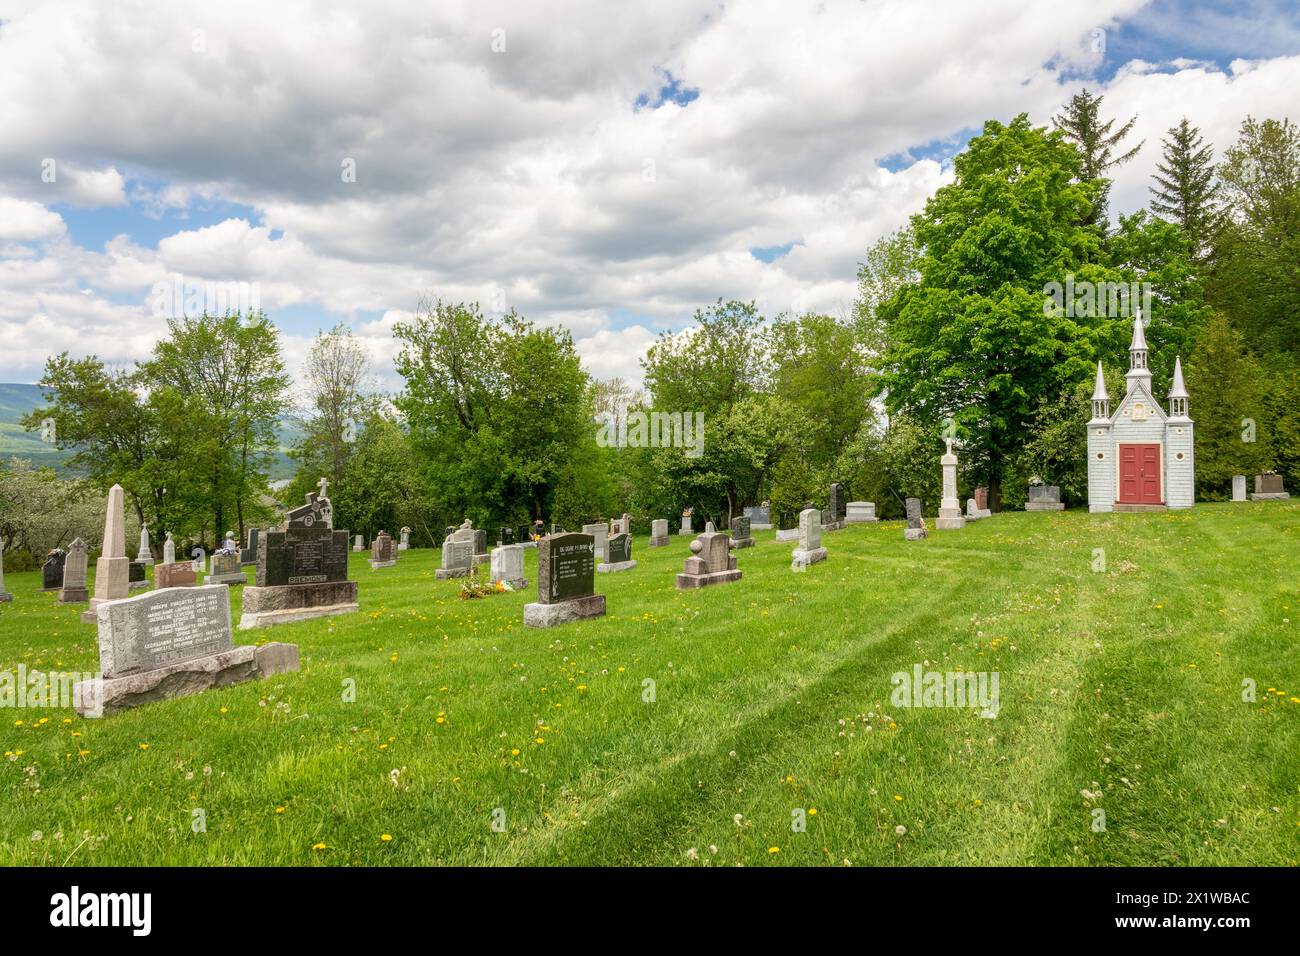 Dead house in the cemetery of the village of Sainte Famille on the island of Orleans near Quebec City, Canada Stock Photo